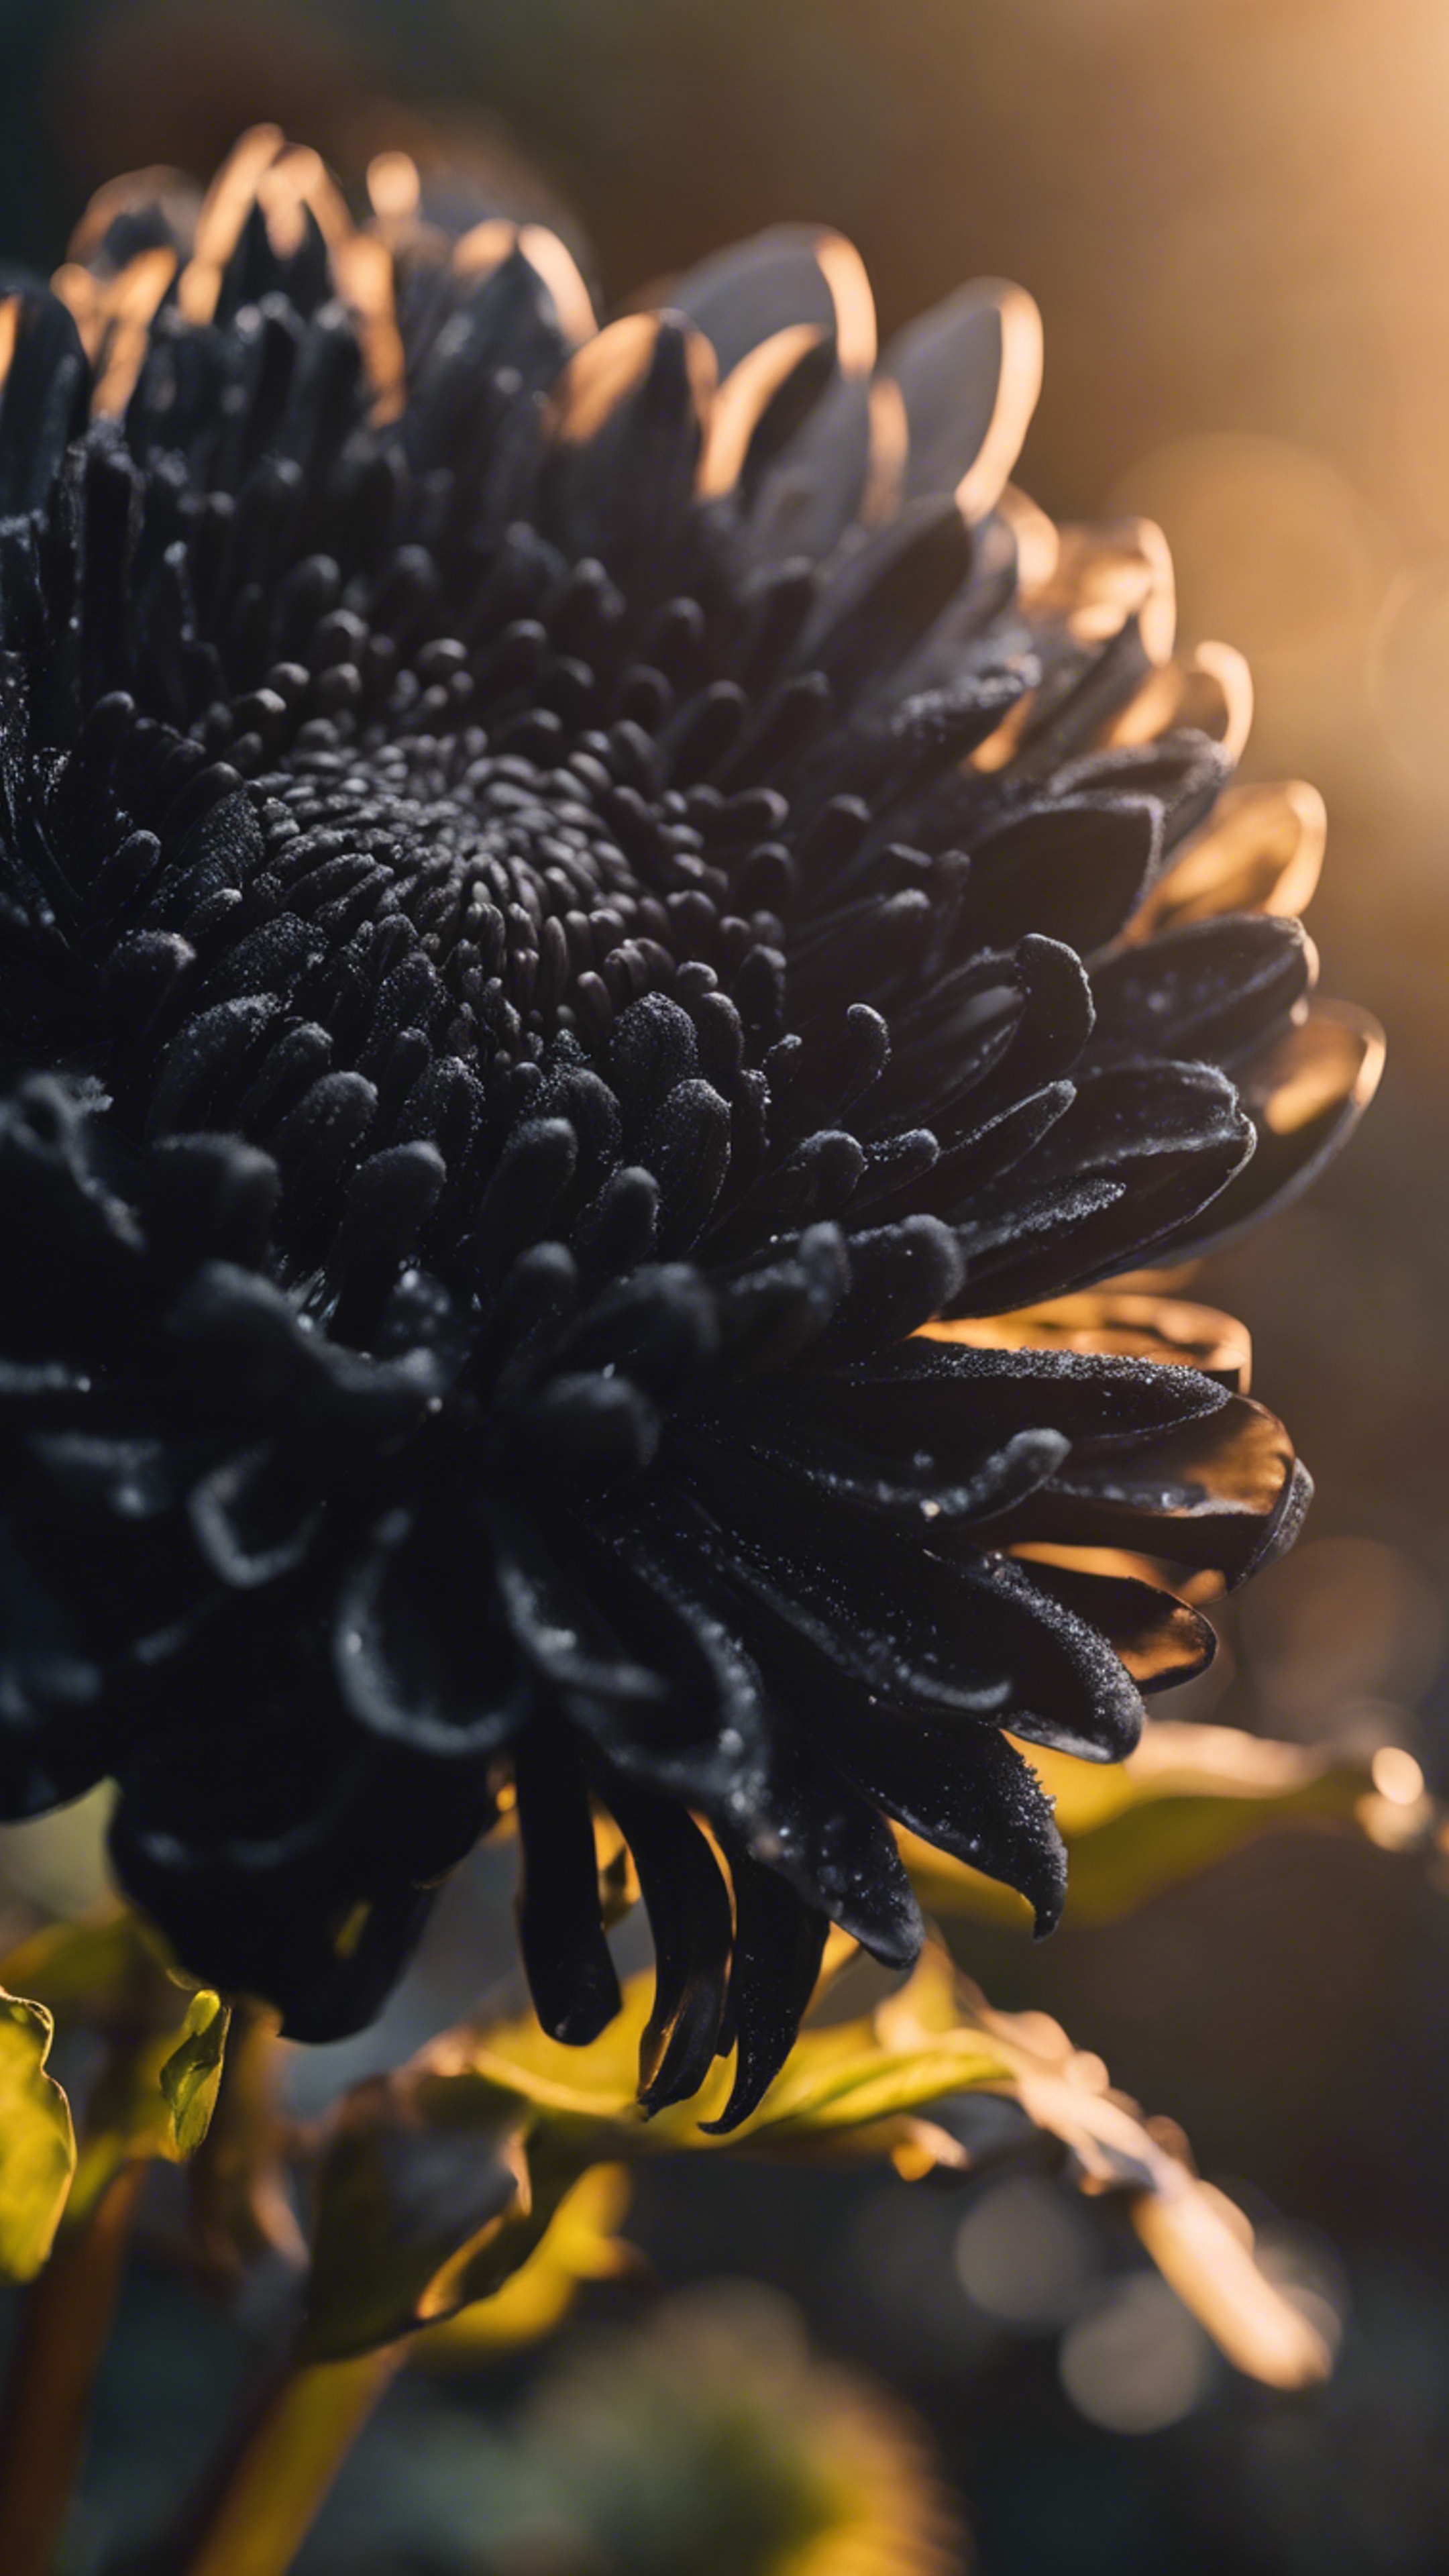 An ethereal black chrysanthemum with intricate petals against a backdrop of the setting sun. Hintergrund[4b40c3df292a42548d77]